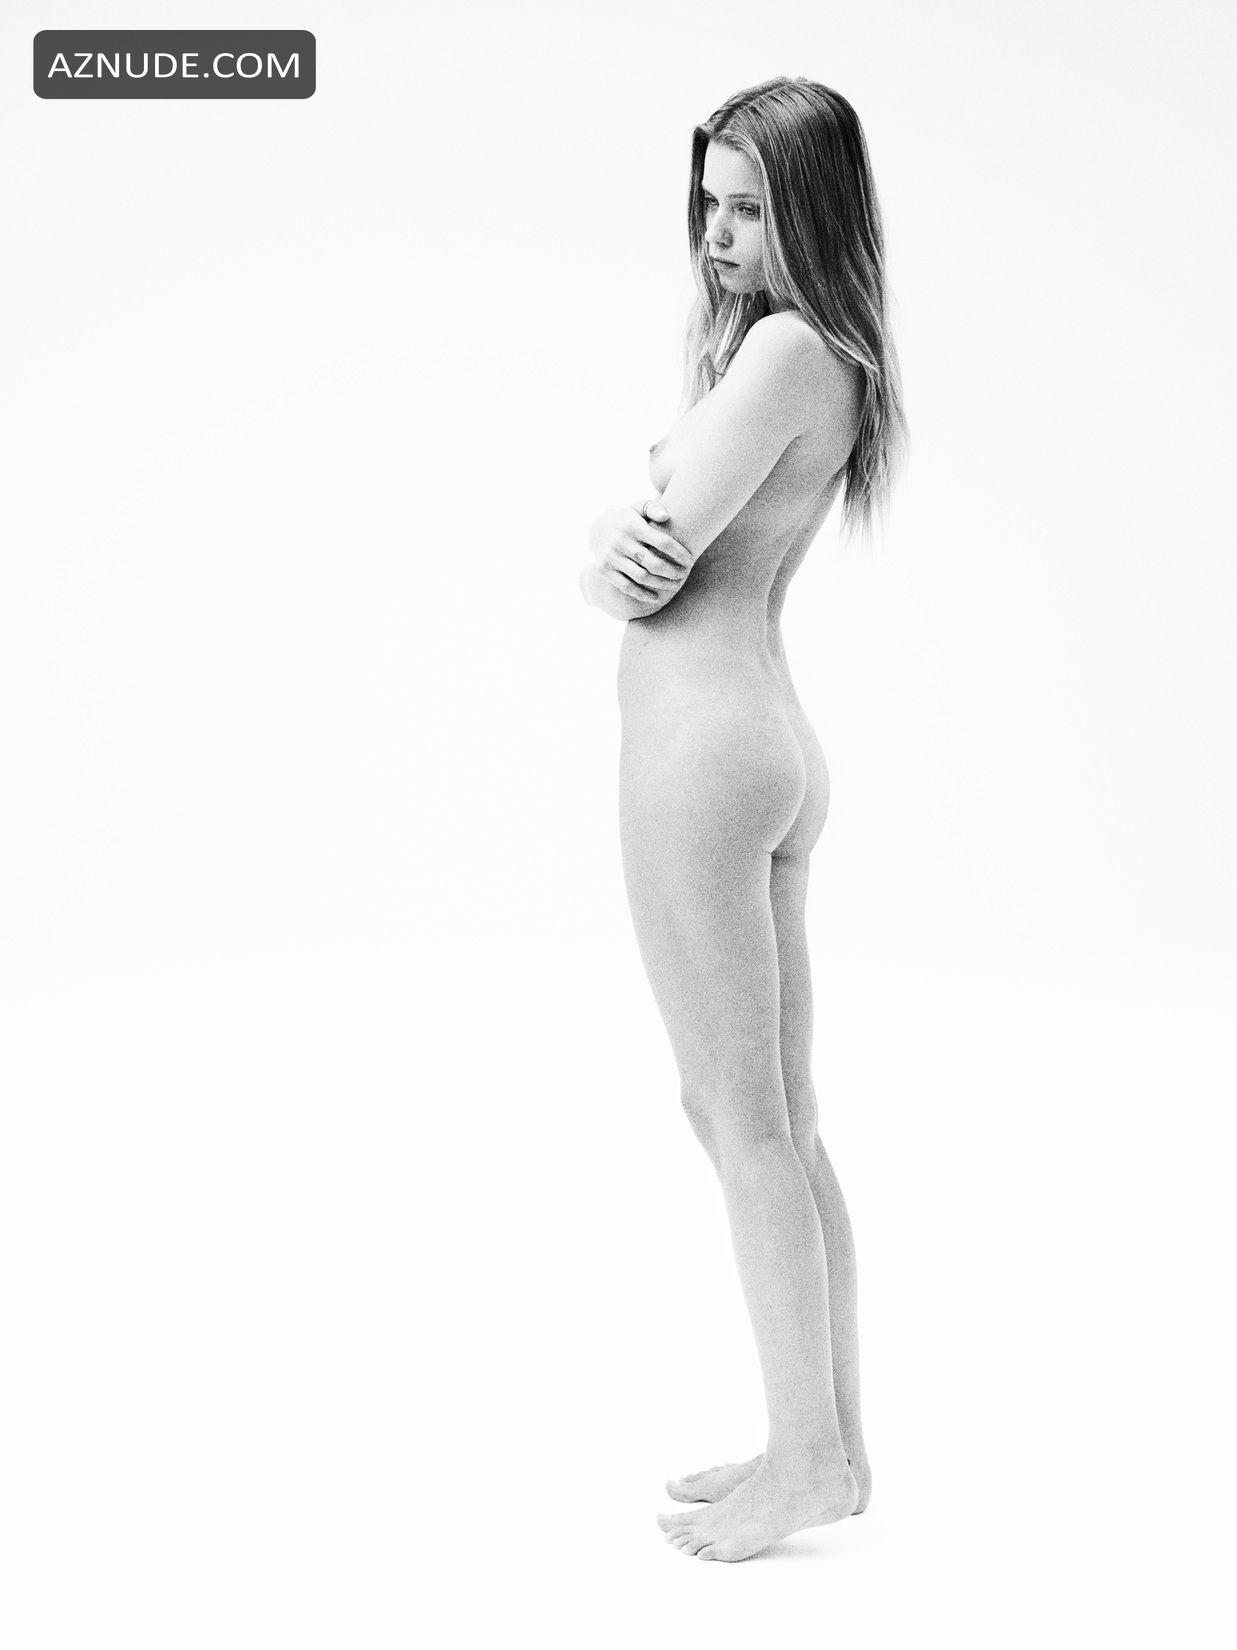 Abbey lee naked